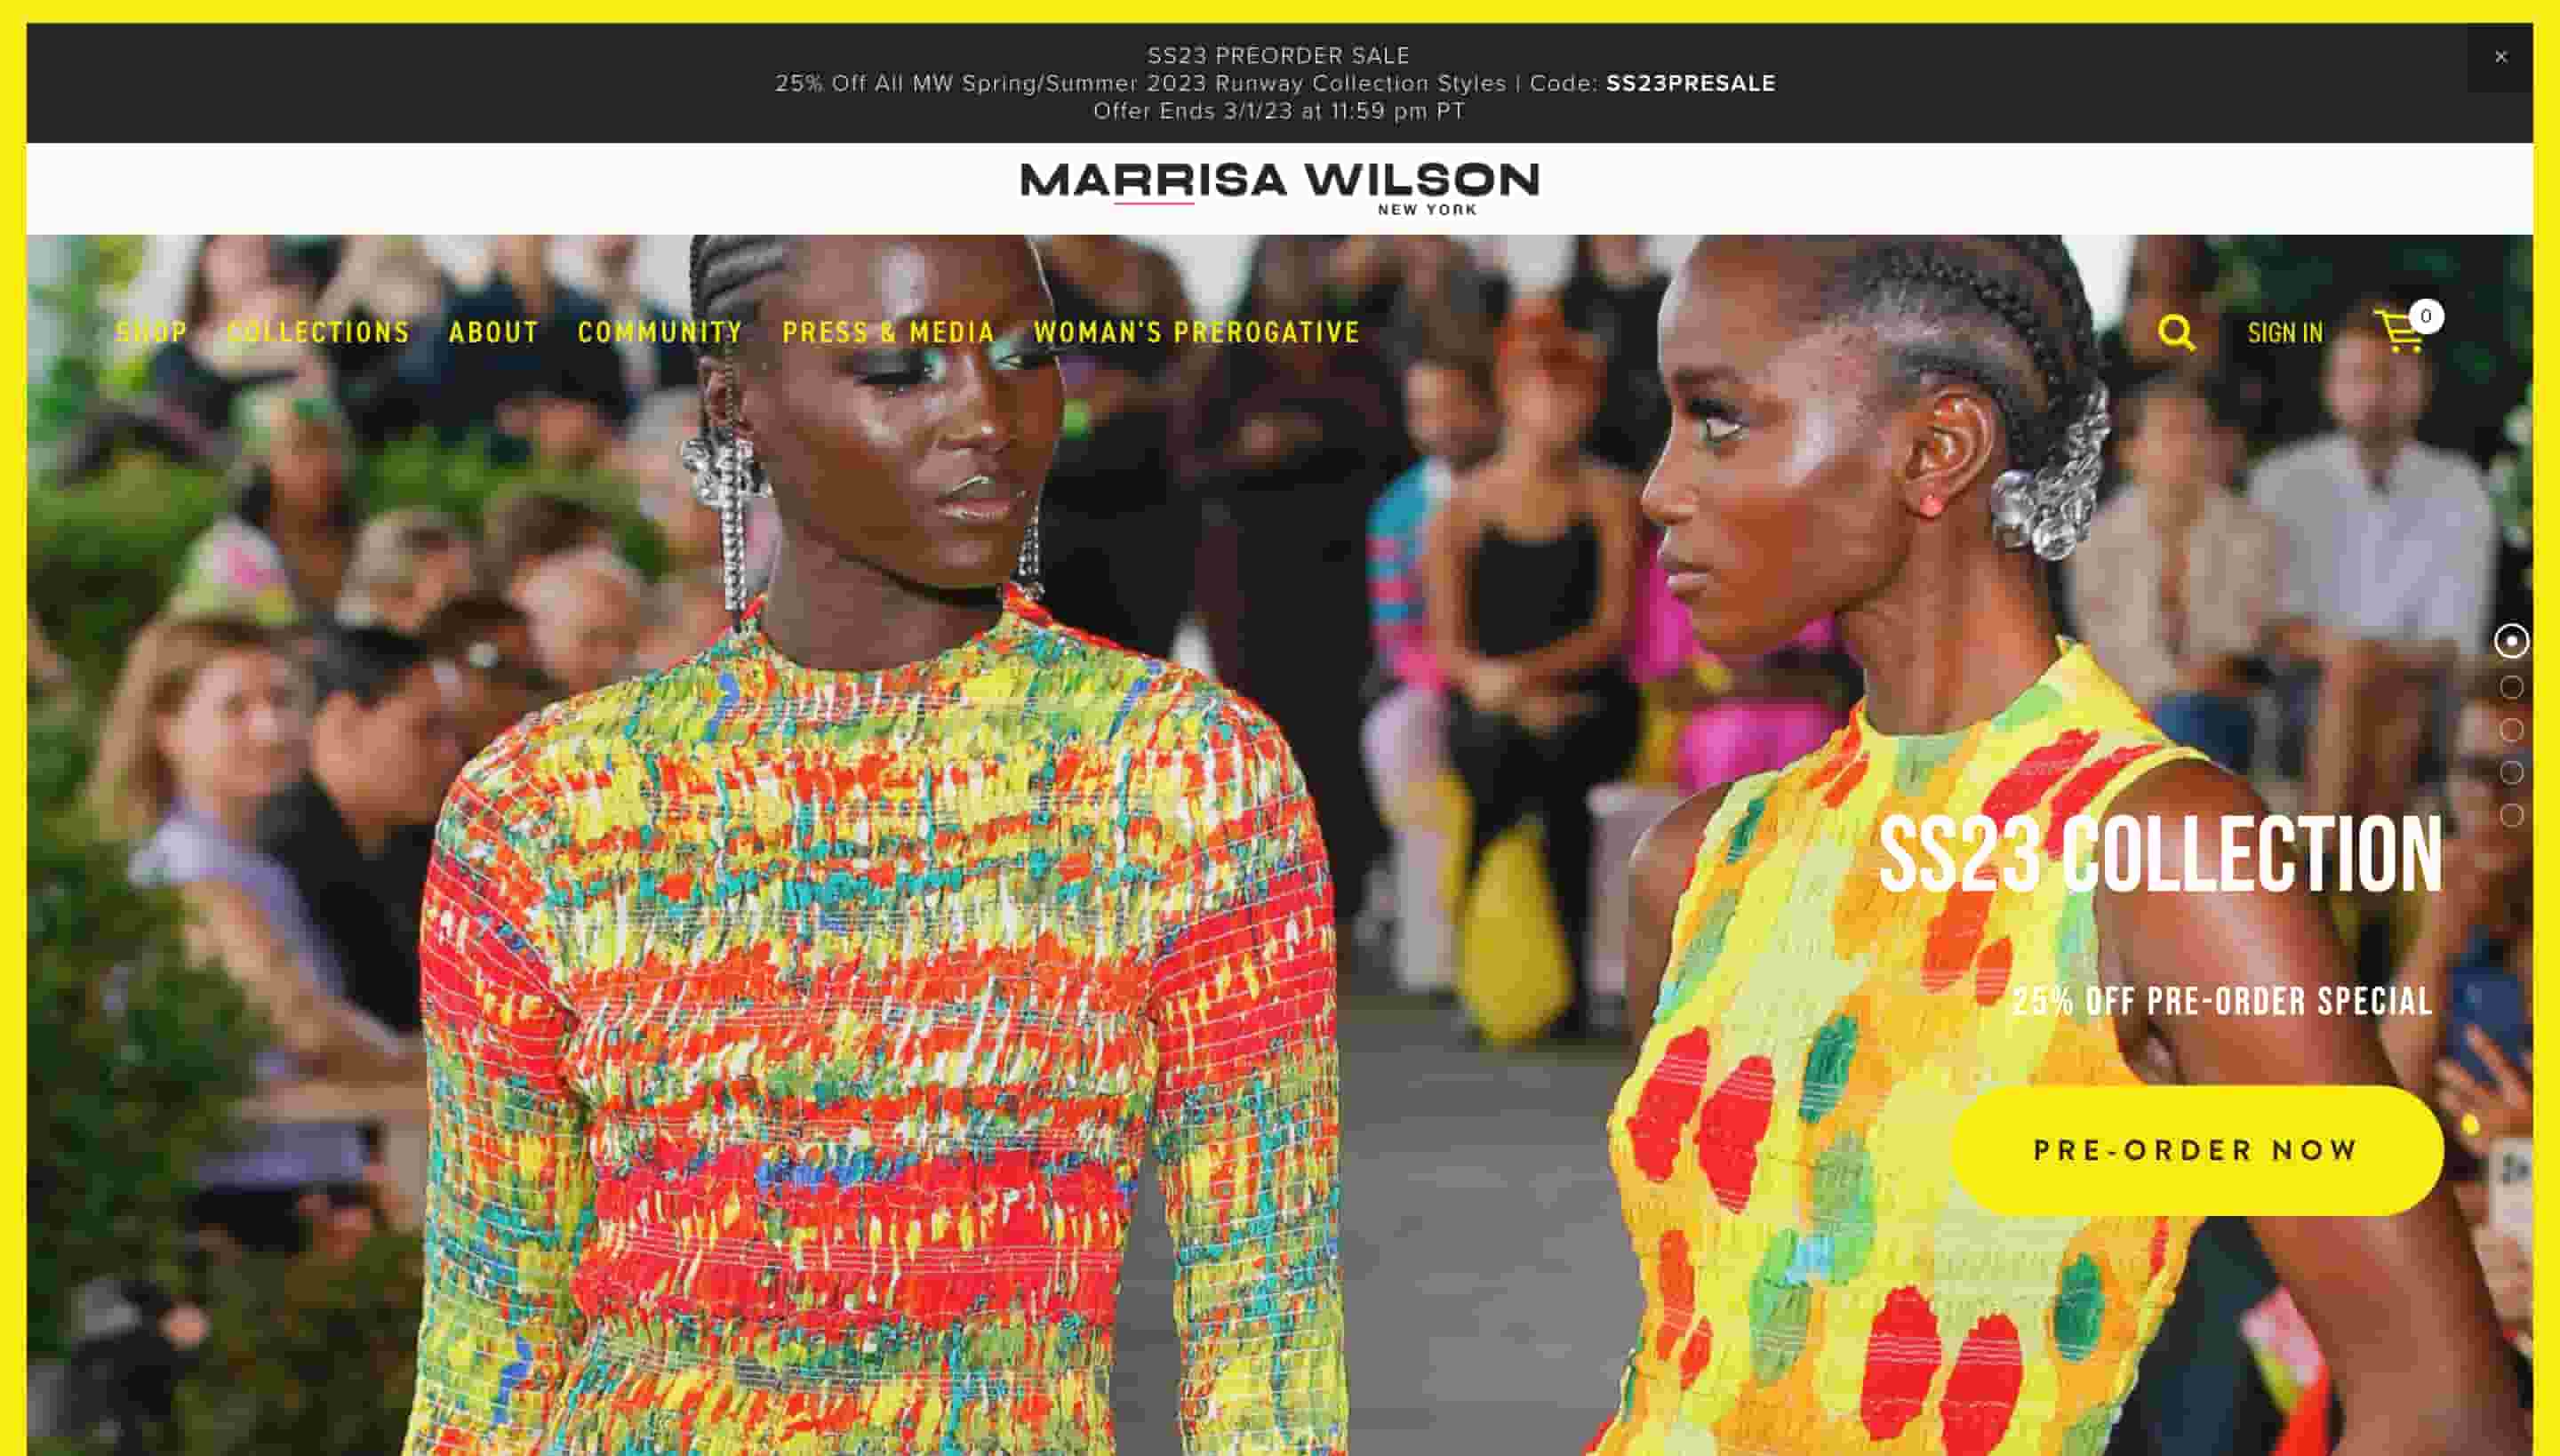 fashion website design Marrisa Wilson shows two models from runway show looking at eachother in colorful clothing. 